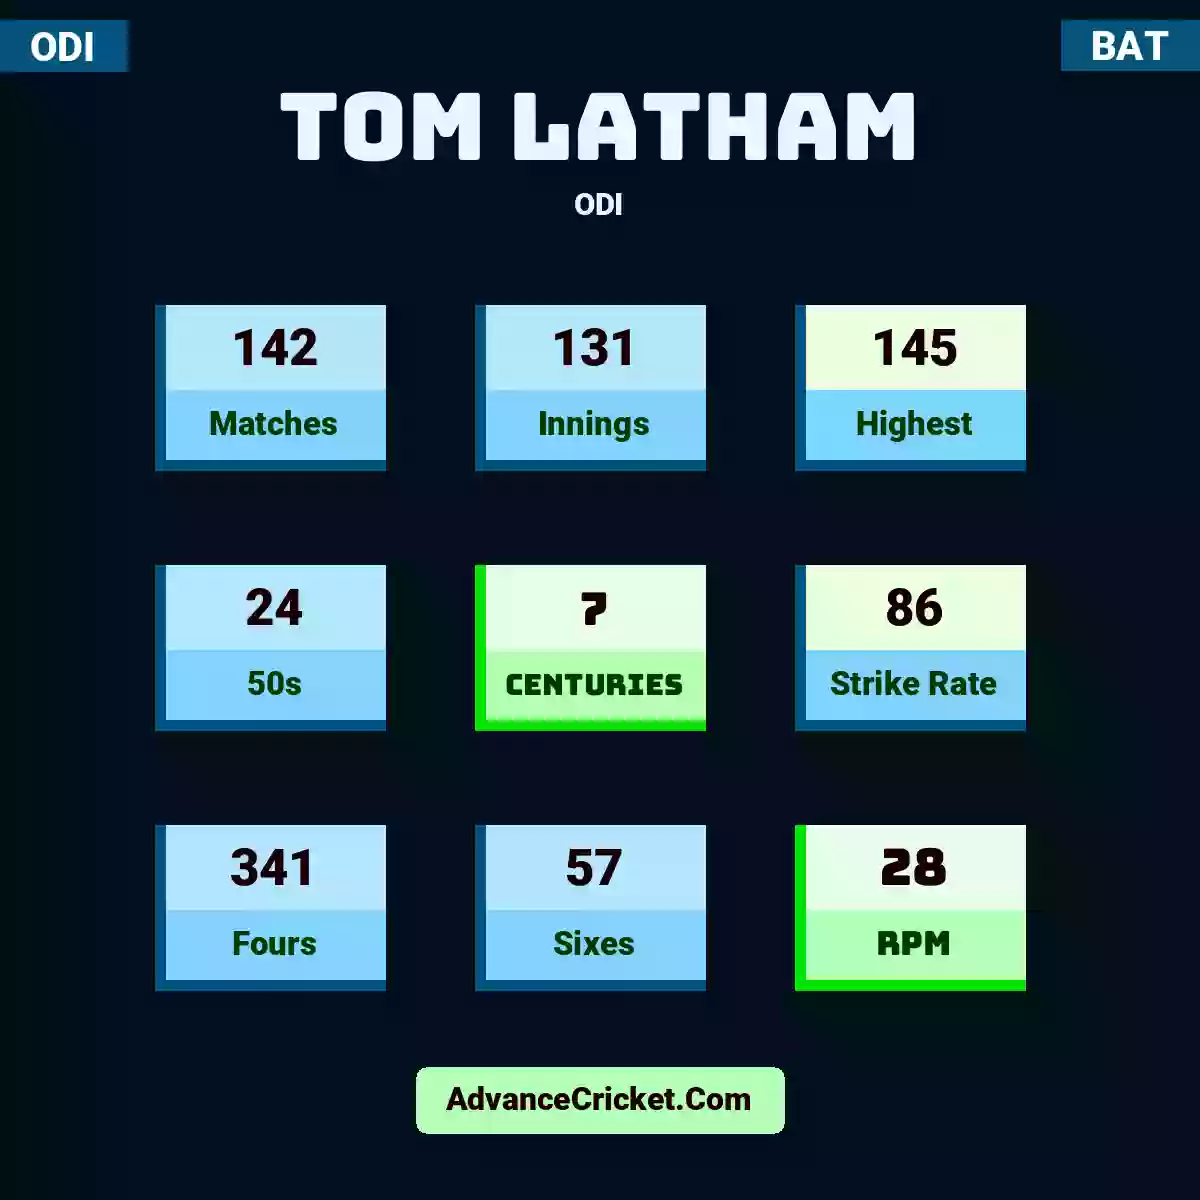 Tom Latham ODI , Tom Latham played 142 matches, scored 145 runs as highest, 24 half-centuries, and 7 centuries, with a strike rate of 86. T.Latham hit 341 fours and 57 sixes, with an RPM of 28.